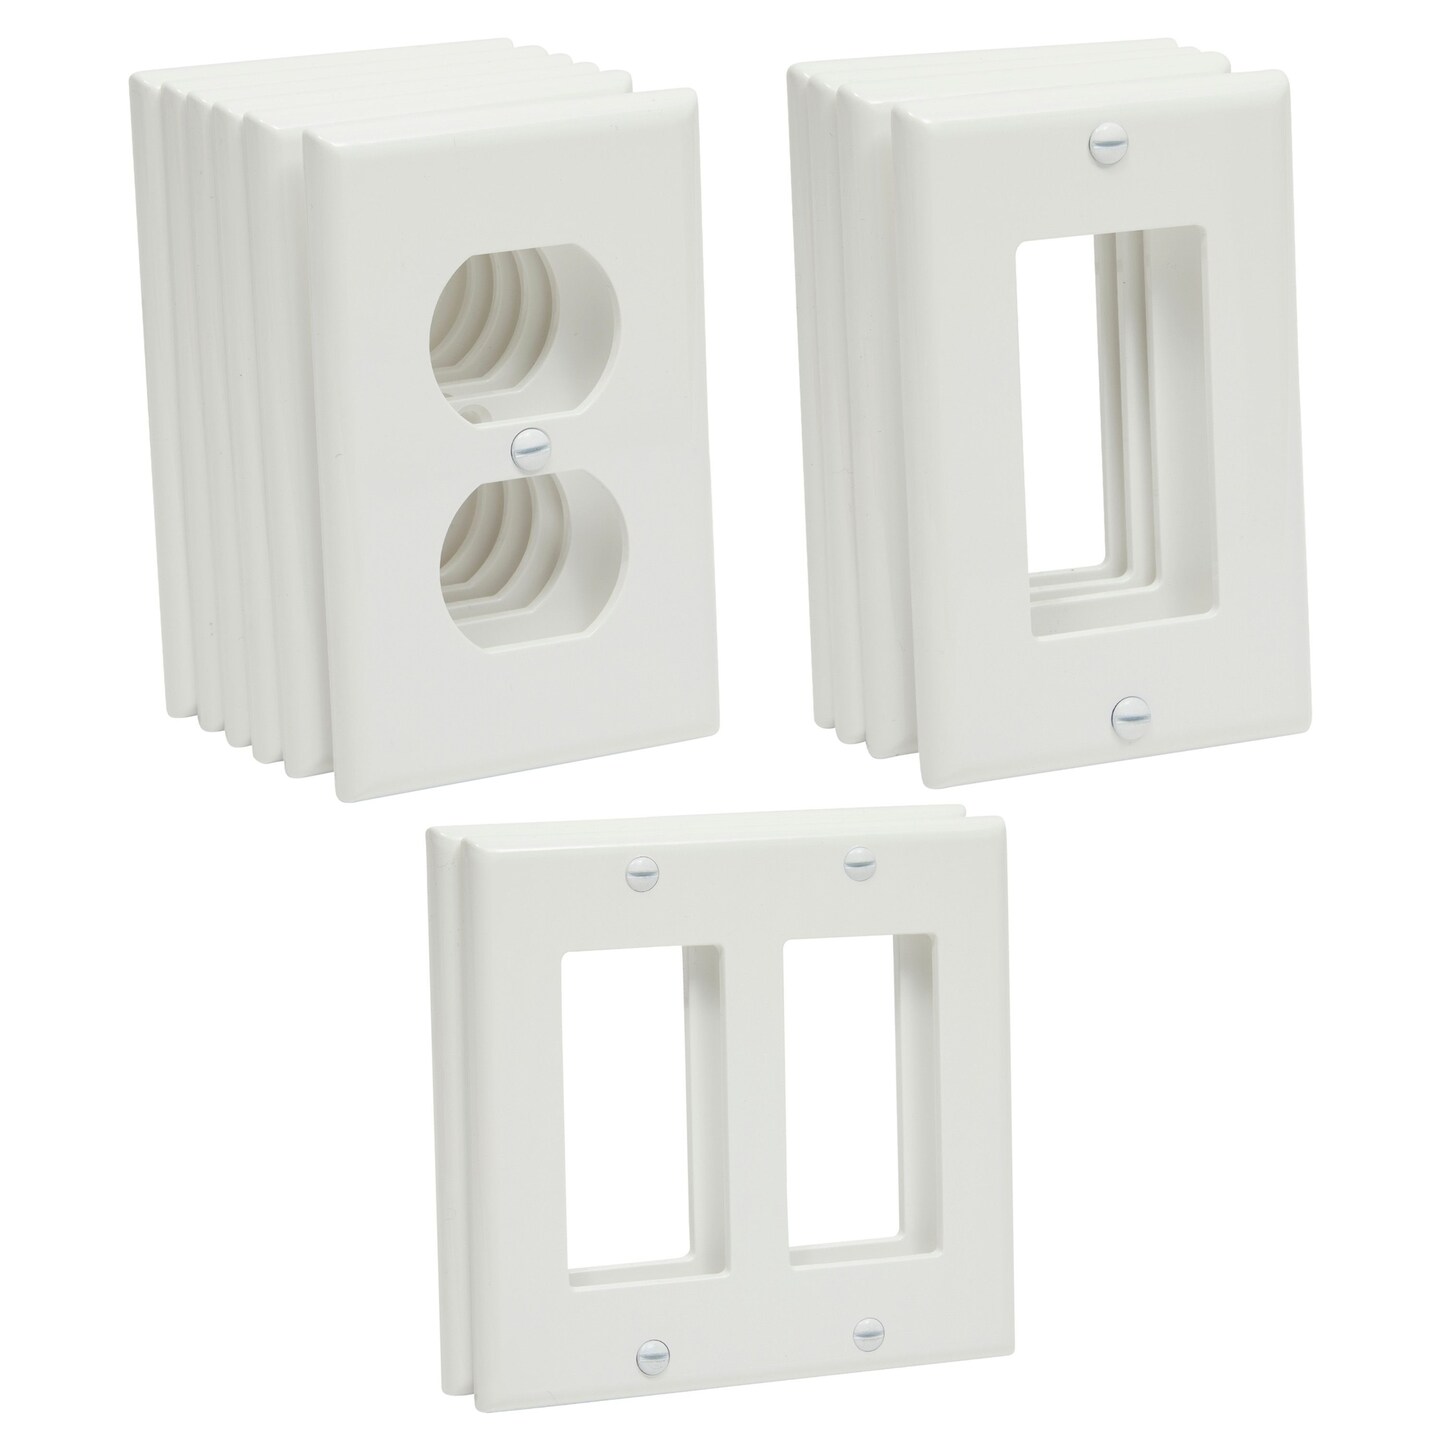 12 Piece Standard Light Switch Plates and Outlet Covers, 1-Gang, 2-Gang,  Duplex Receptacle for Wall, White